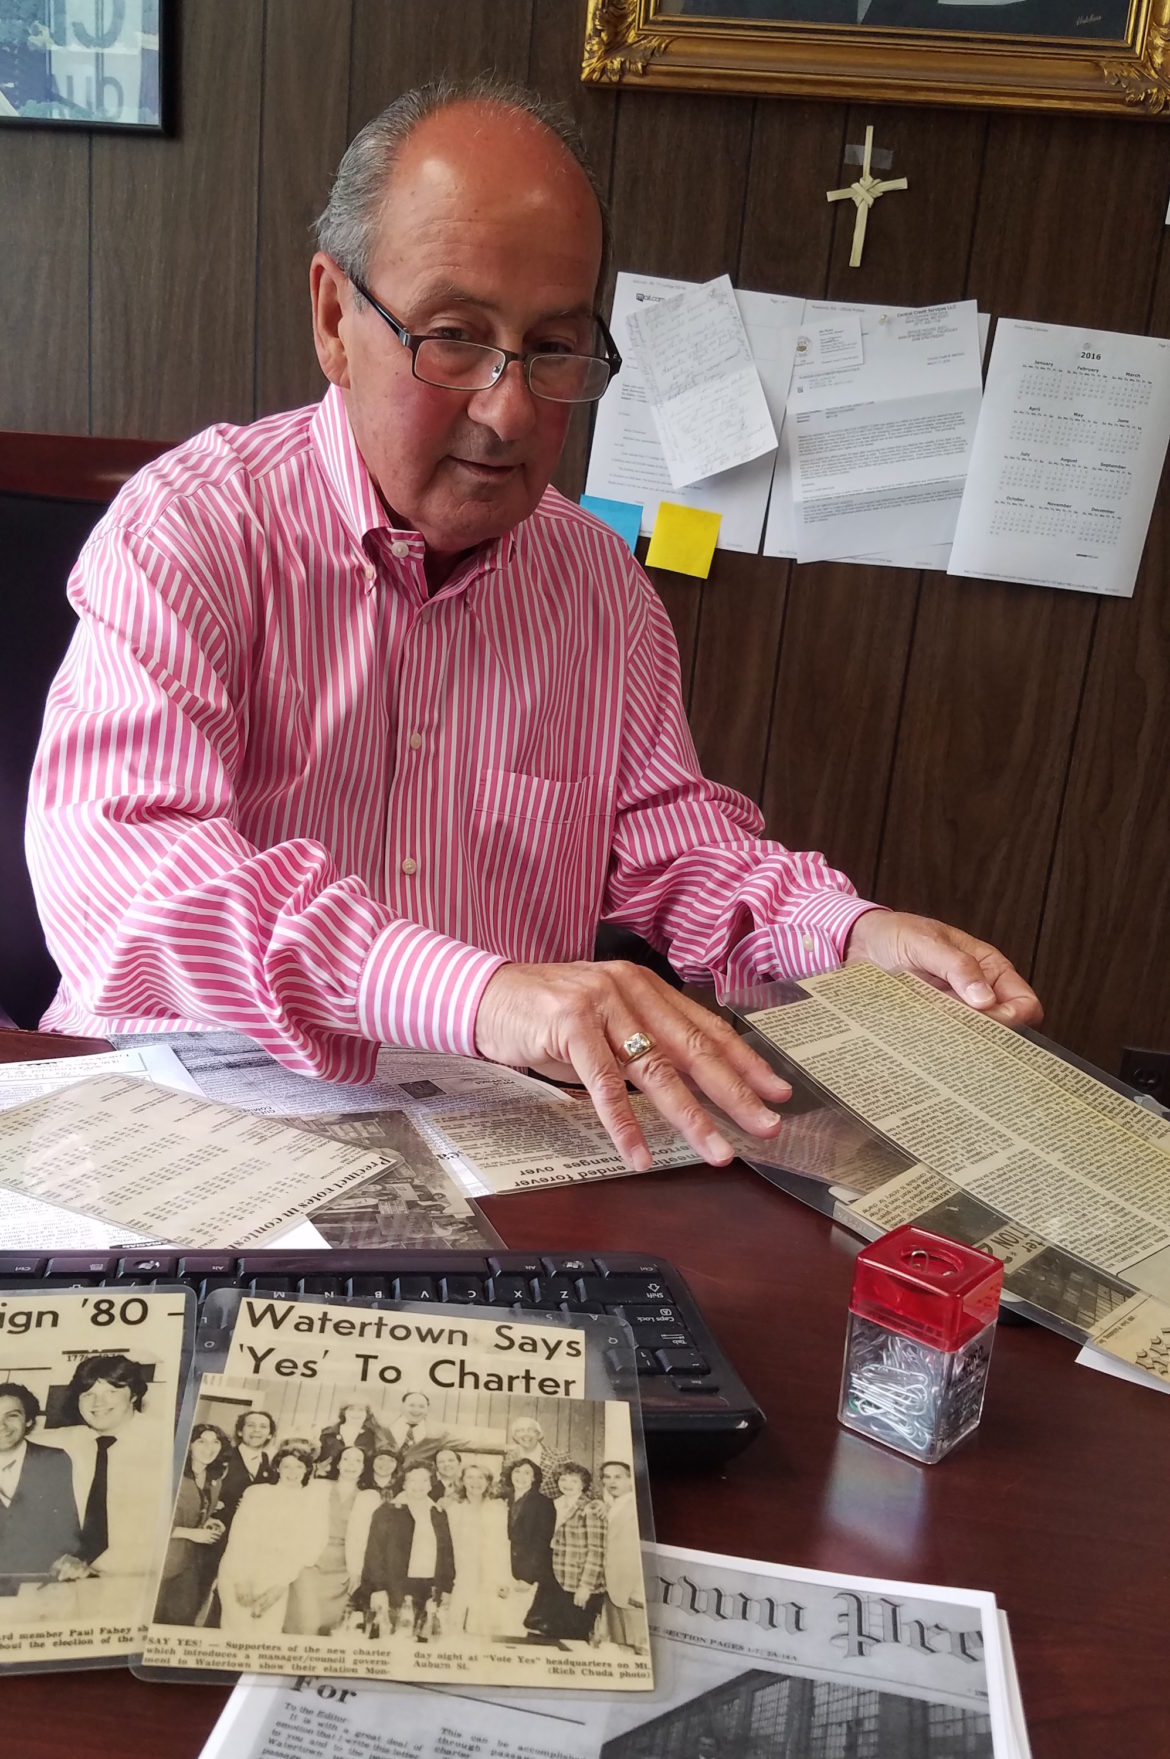 John Airasian looks through his press clippings from the Watertown Charter effort in his office at Eastern Clothing.